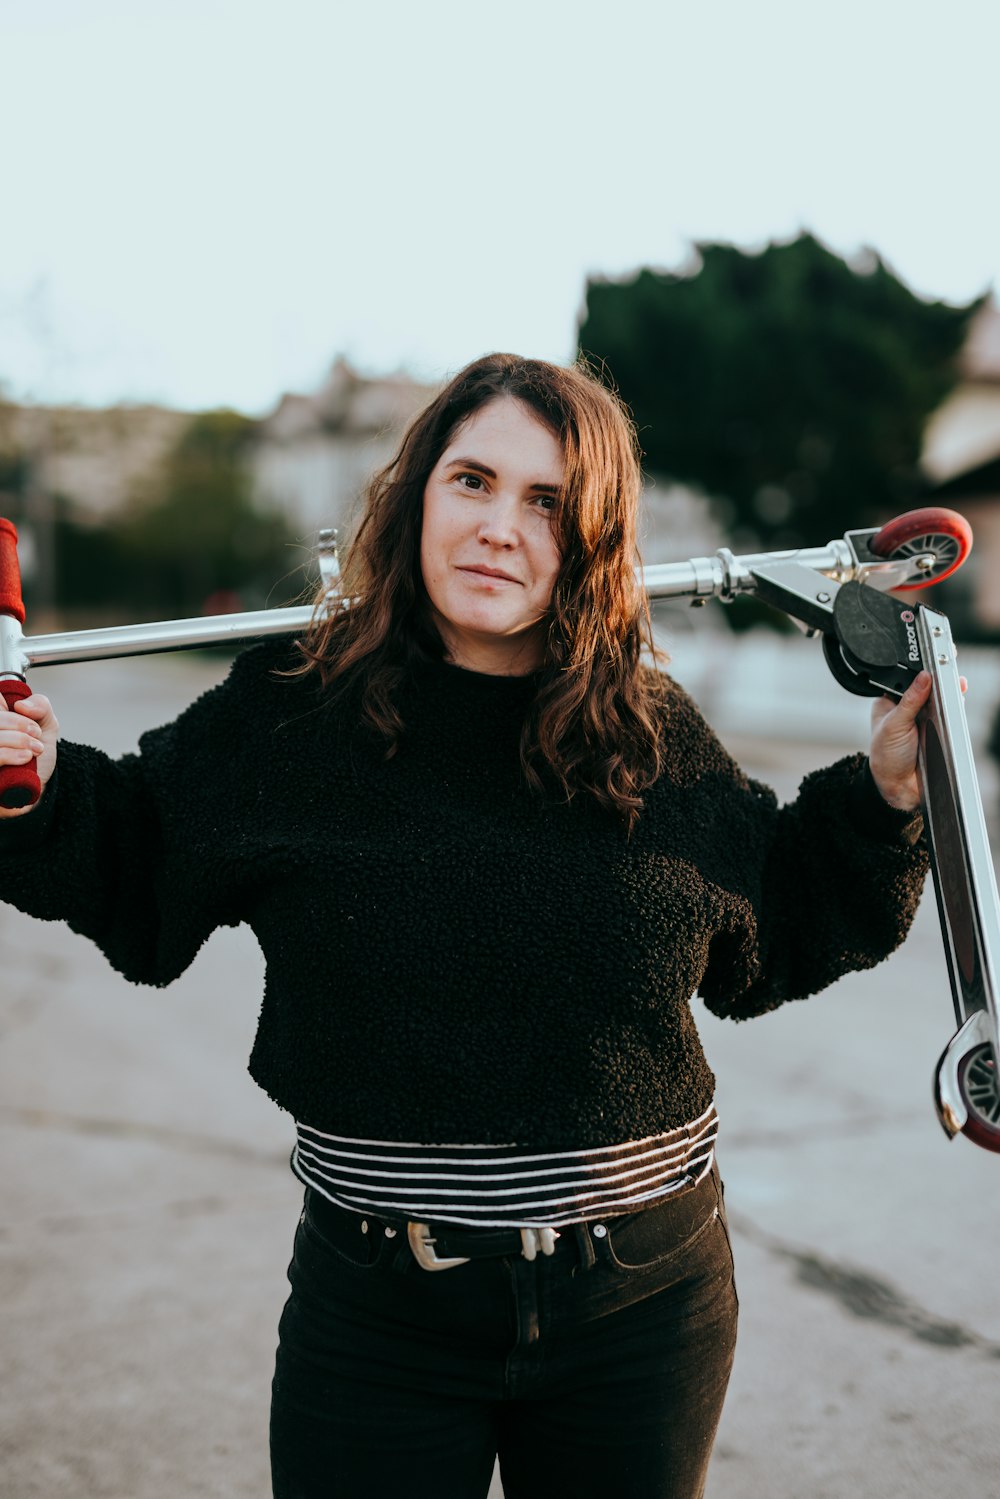 woman in black sweater and striped skirt holding a bicycle handle bar